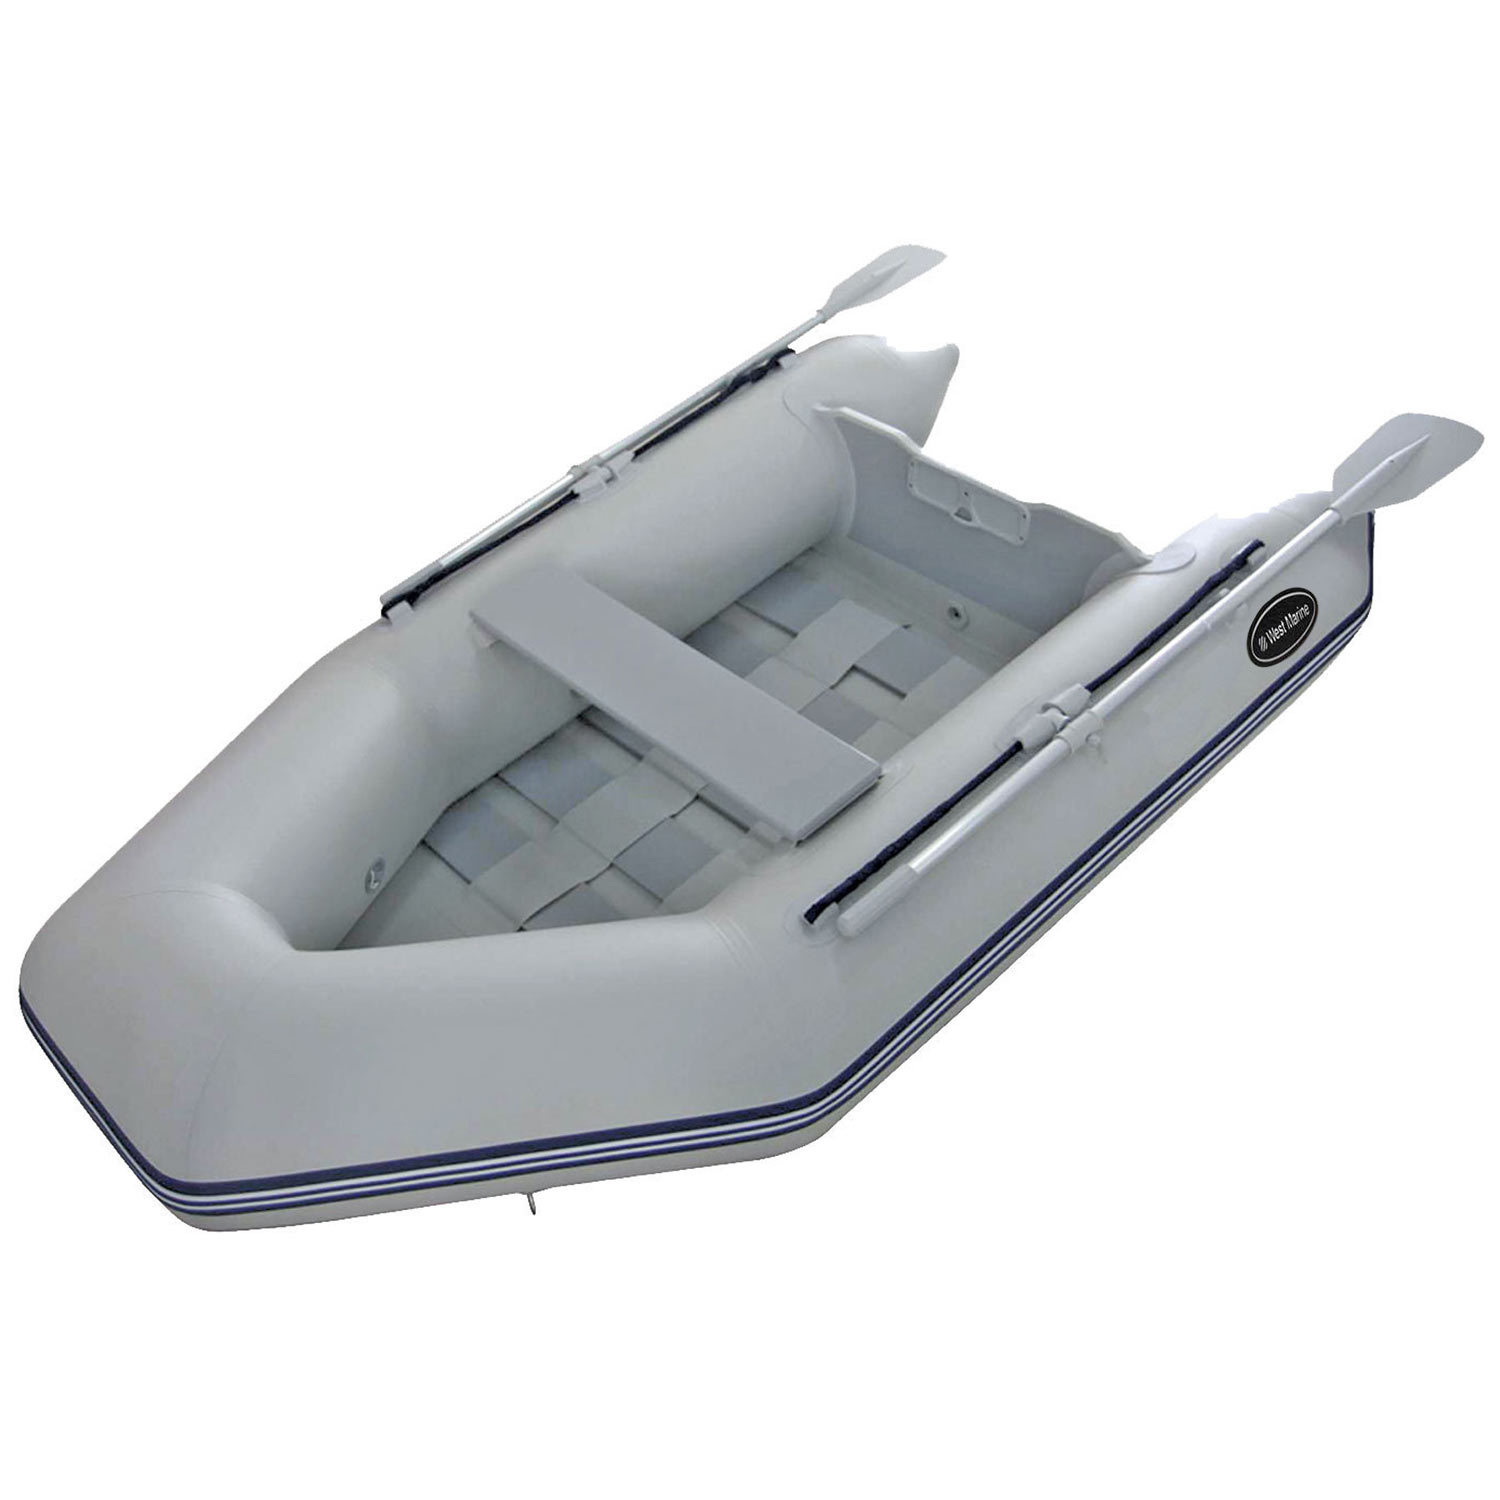 West Marine RU-250 Roll-Up Inflatable Dinghy | for Boats